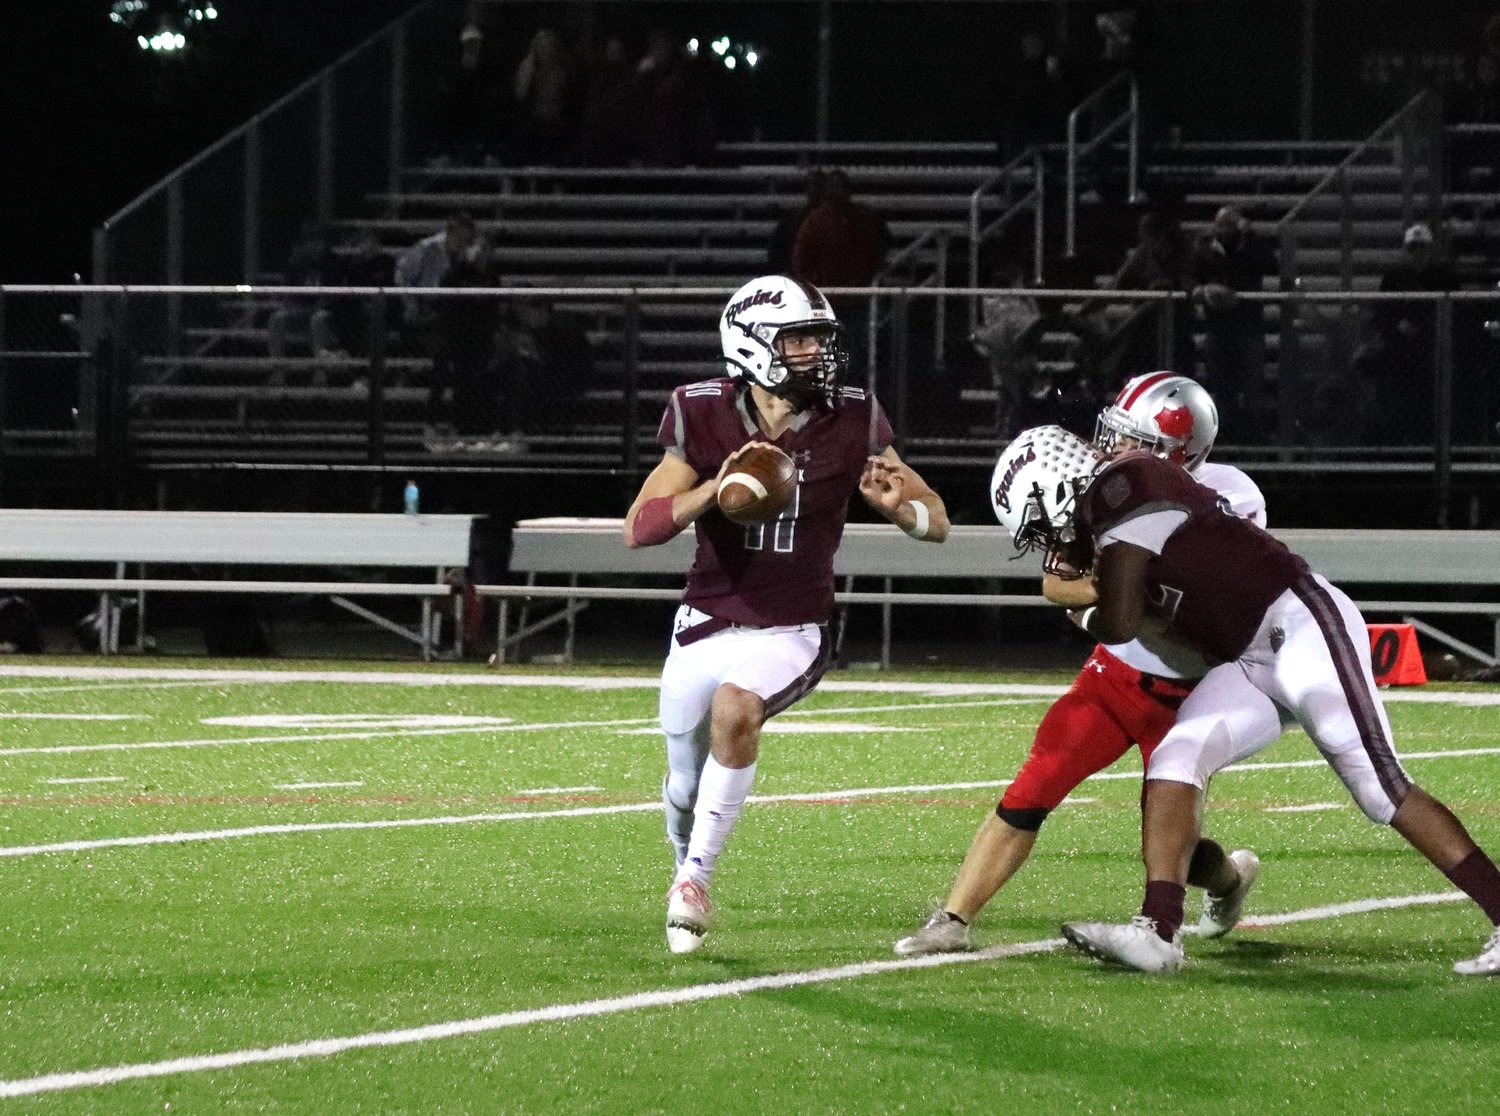 Cam Catterton looked to pass.